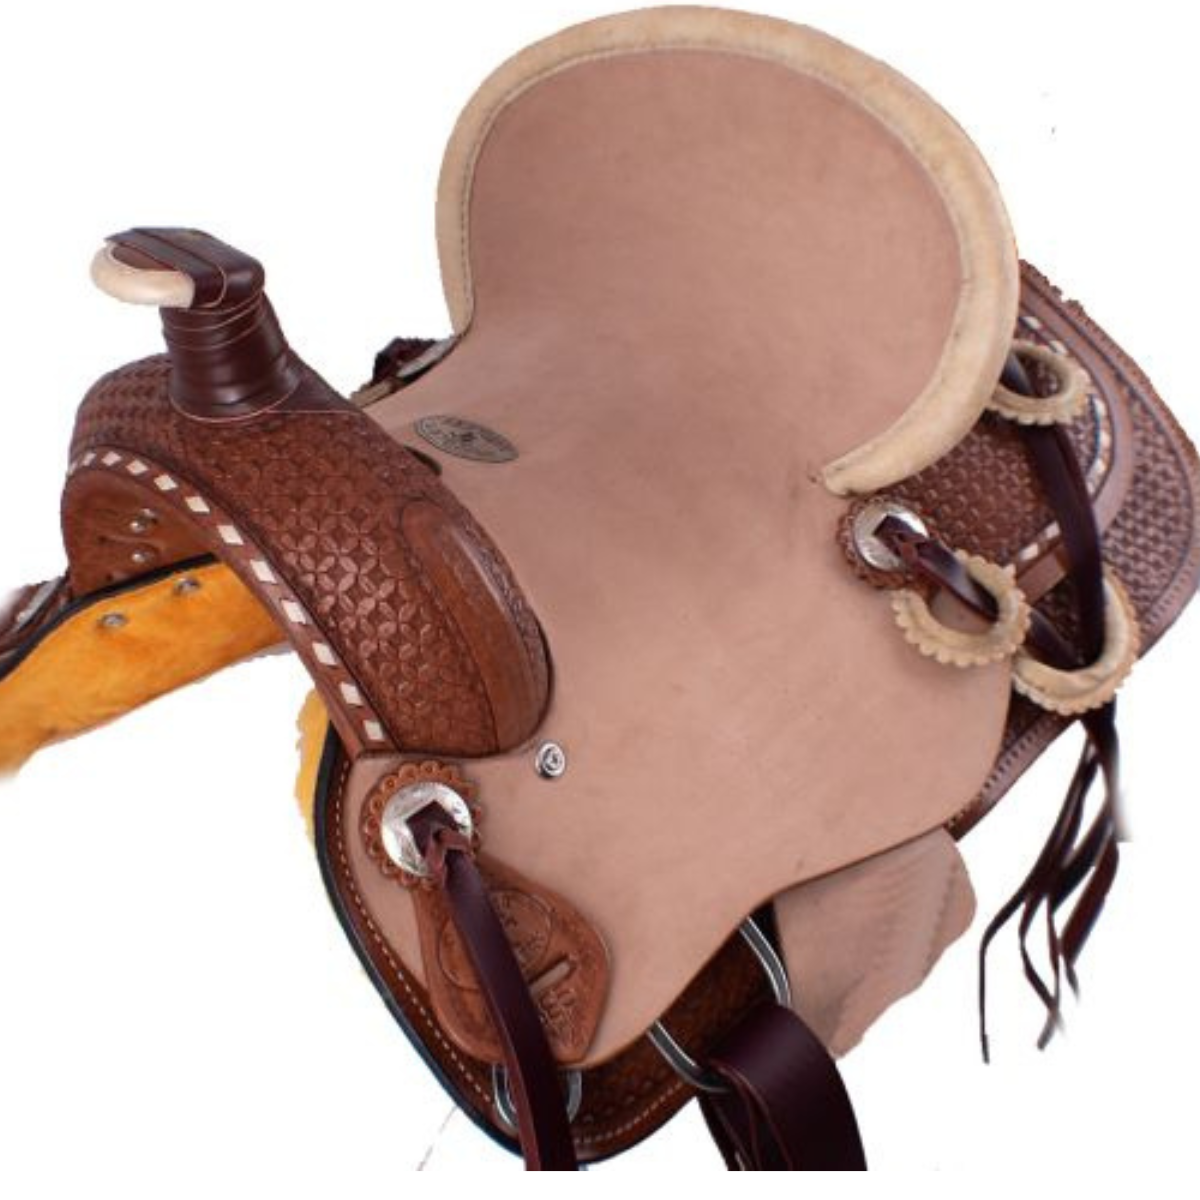 12" DOUBLE T HARD SEAT ROPER STYLE SADDLE WITH BASKET WEAVE TOOLING WITH RAW HIDE ACCENTS - Double T Saddles